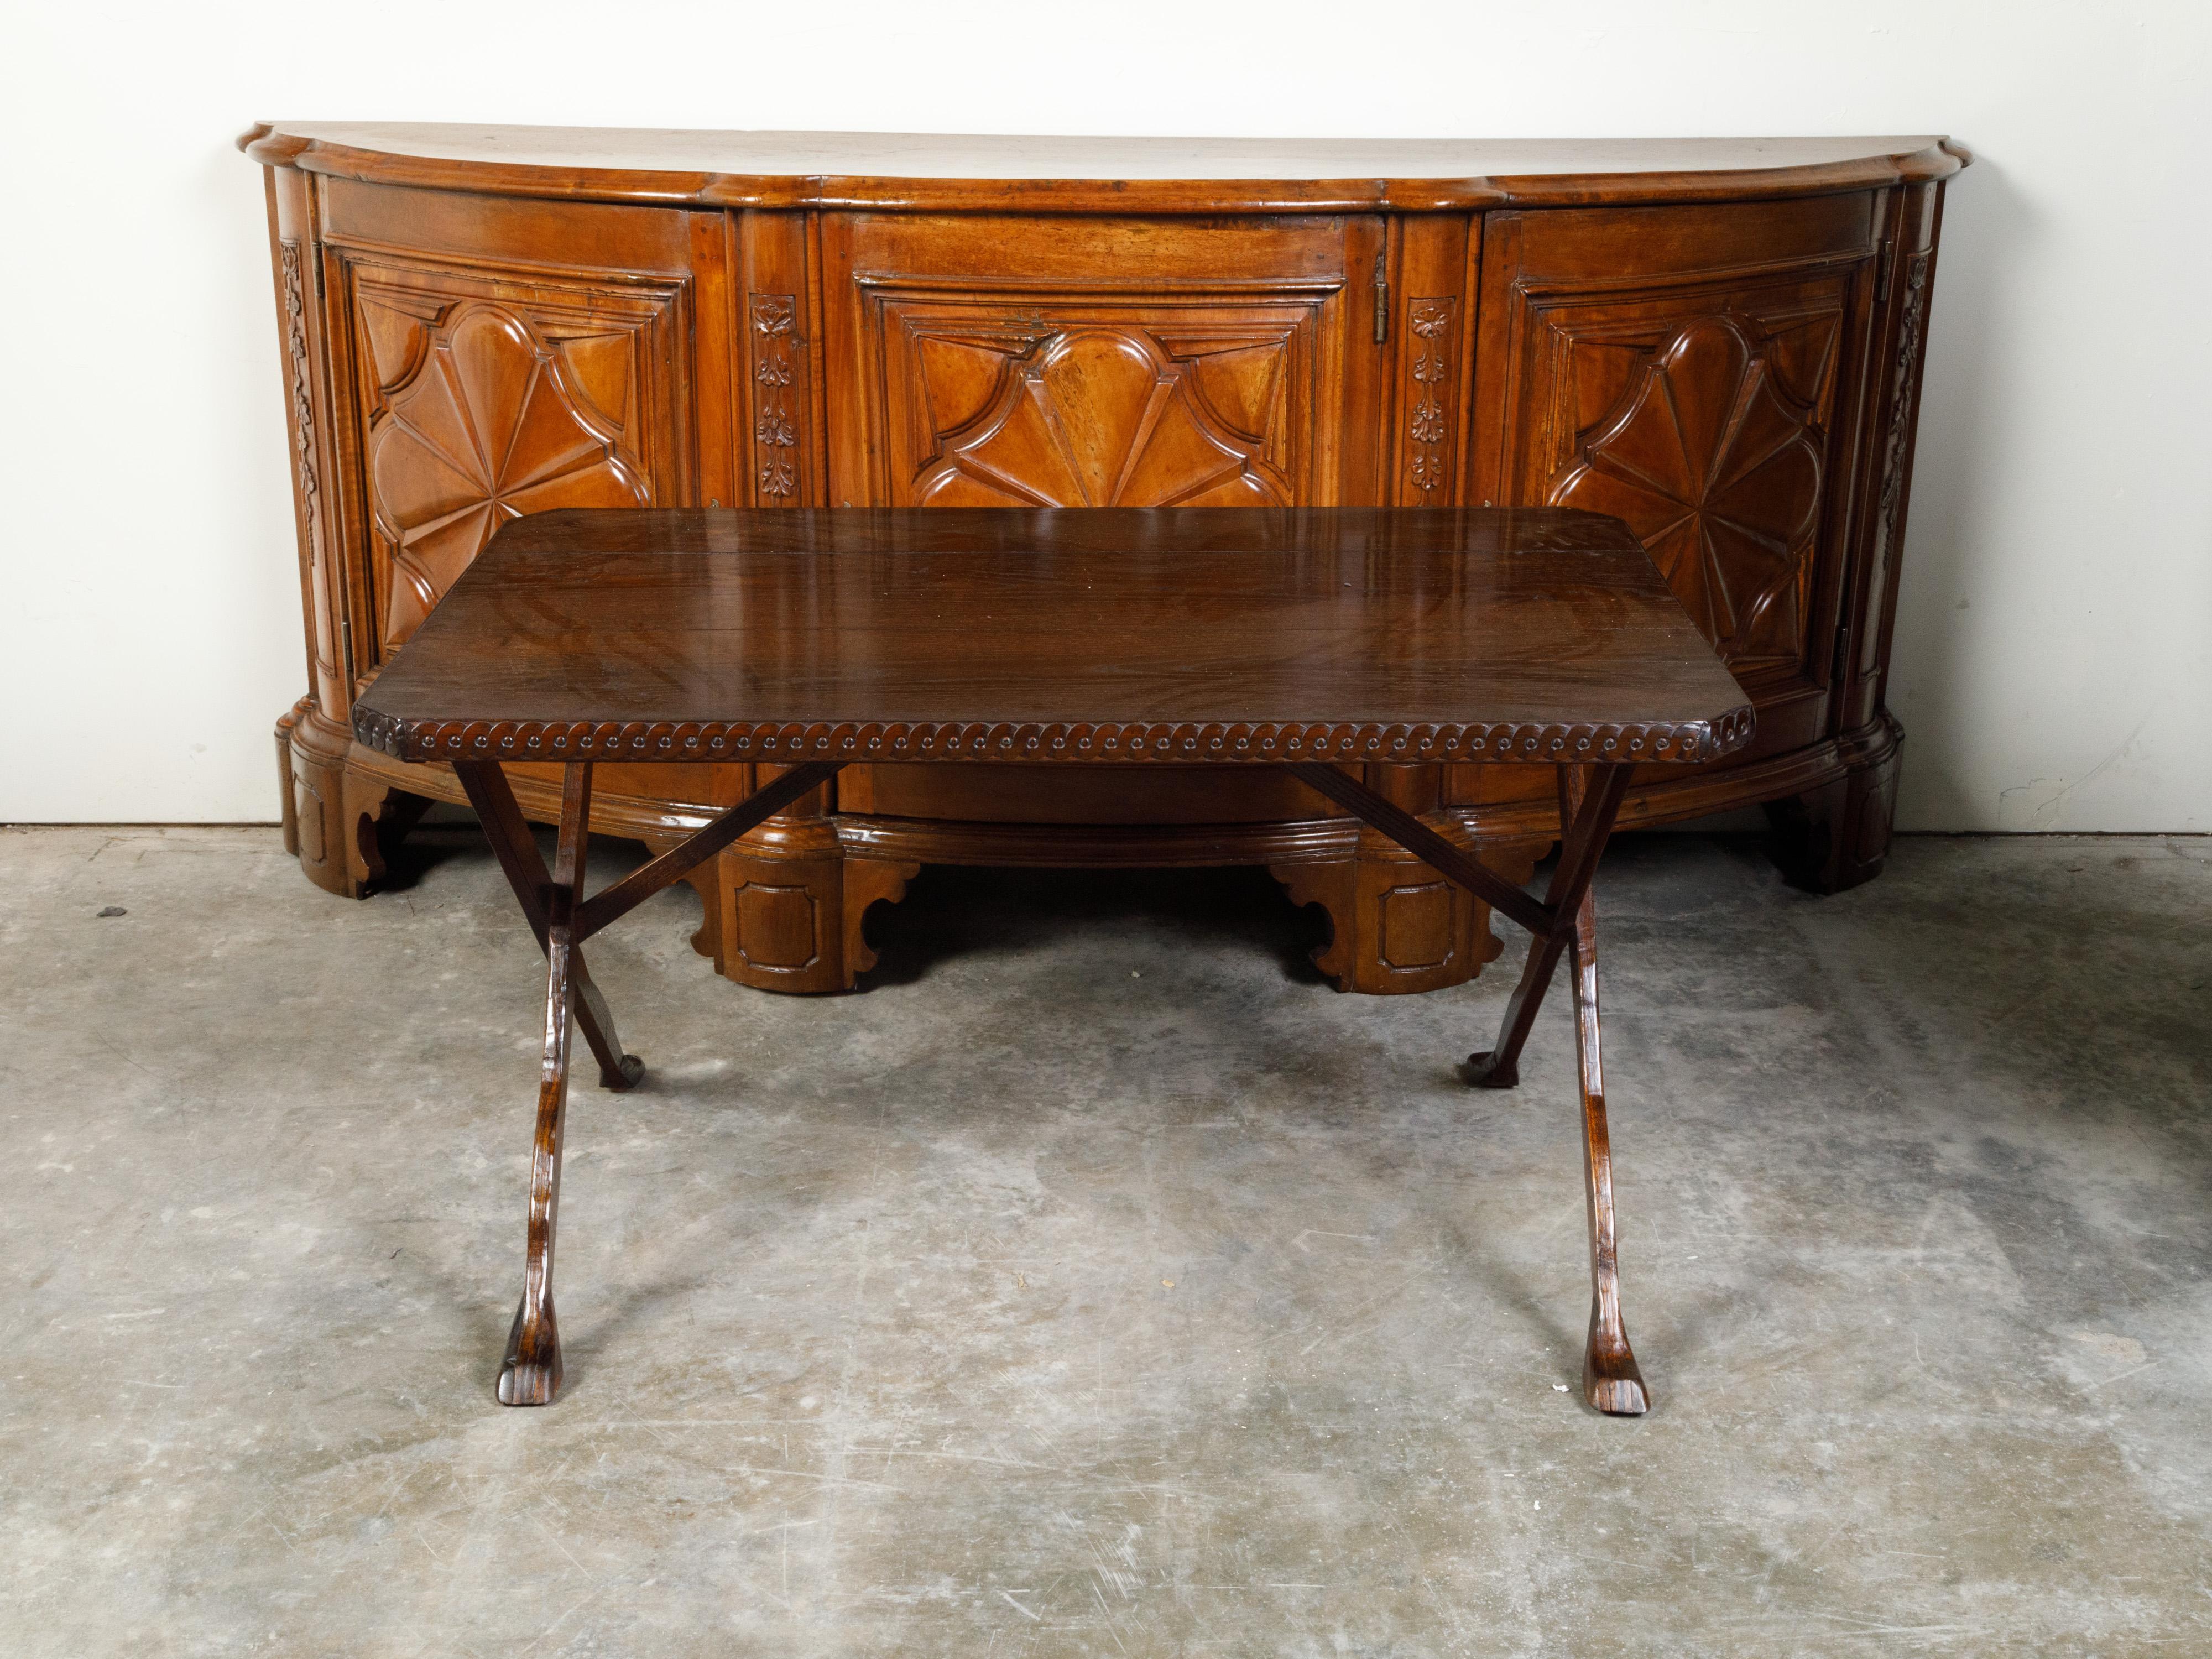 An Italian oak side table from the 19th century, with carved guilloche friezes and X-form legs. Created in Italy during the 19th century, this oak side table features a rectangular planked top with canted corners, adorned with a Neoclassical style